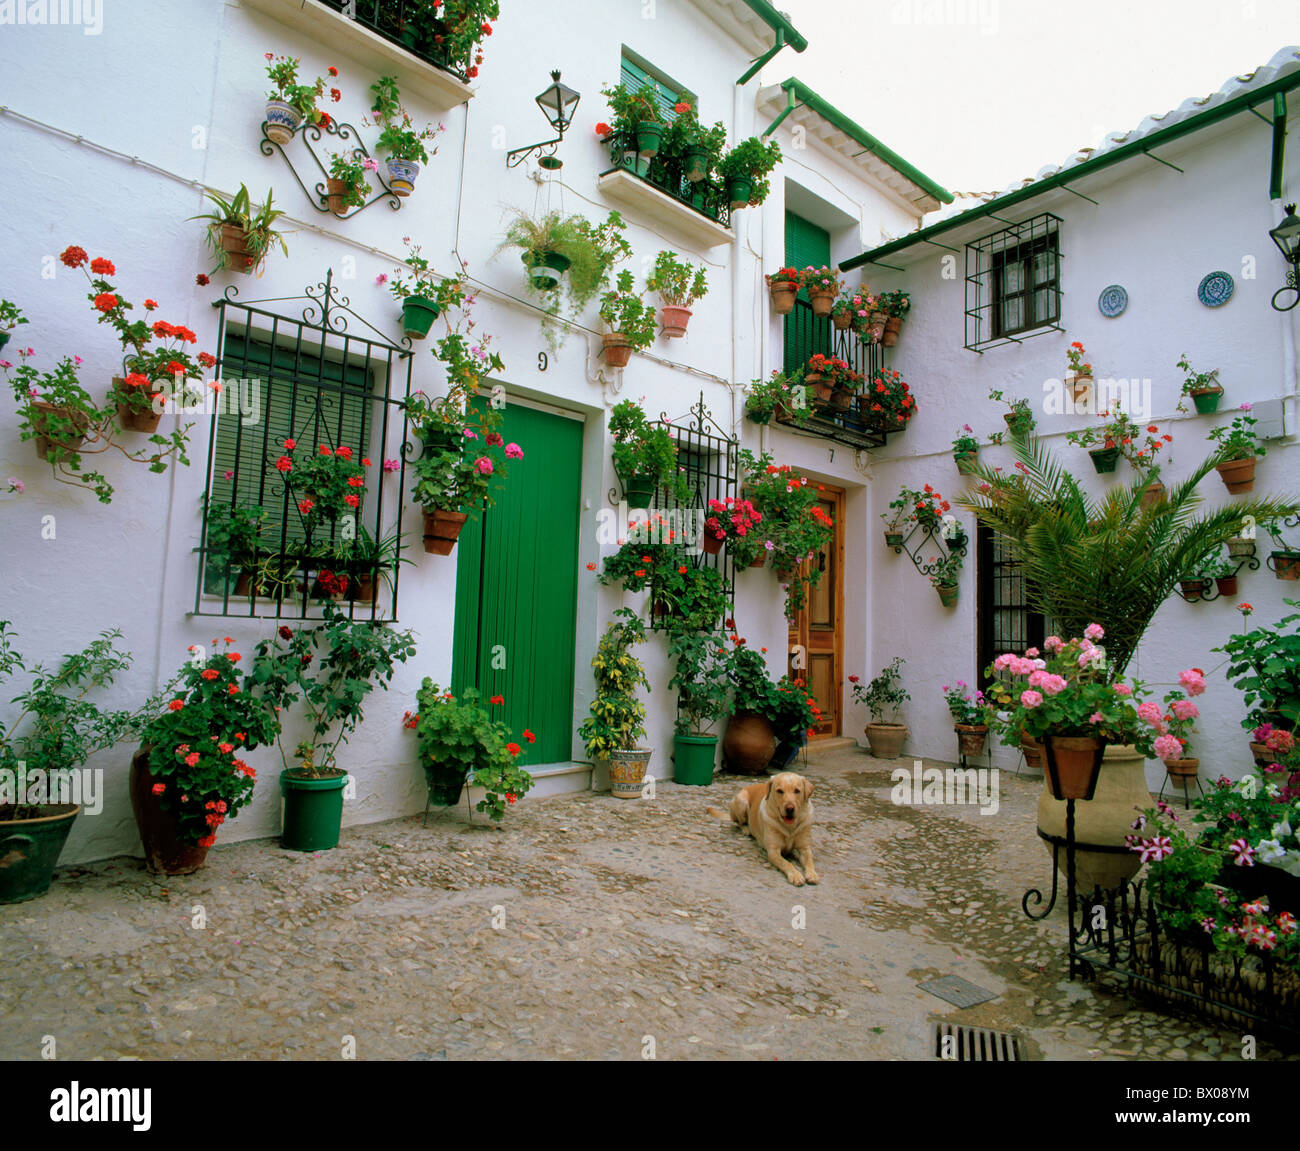 Andalusia floral decoration Cordoba houses homes dog Priego Spain Europe typical Stock Photo